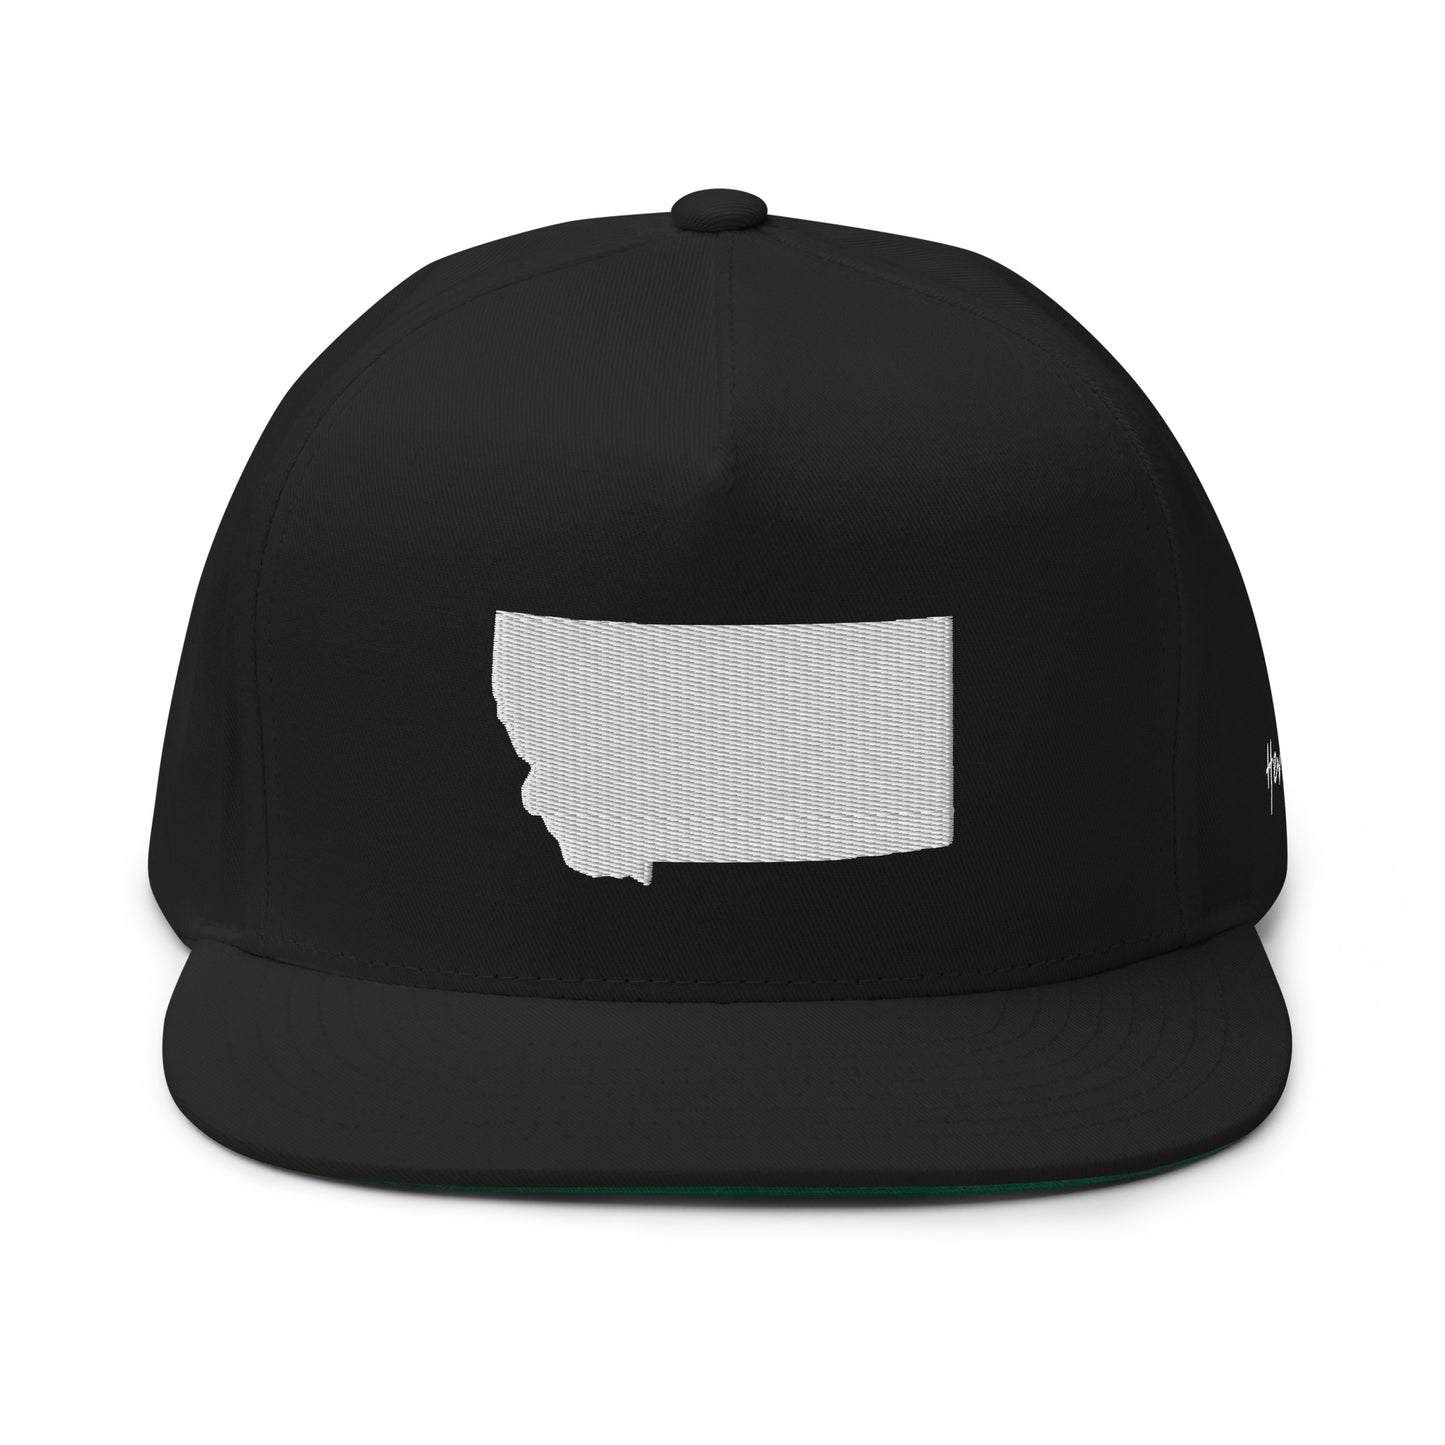 Montana State Silhouette 5 Panel A-Frame Snapback Hat